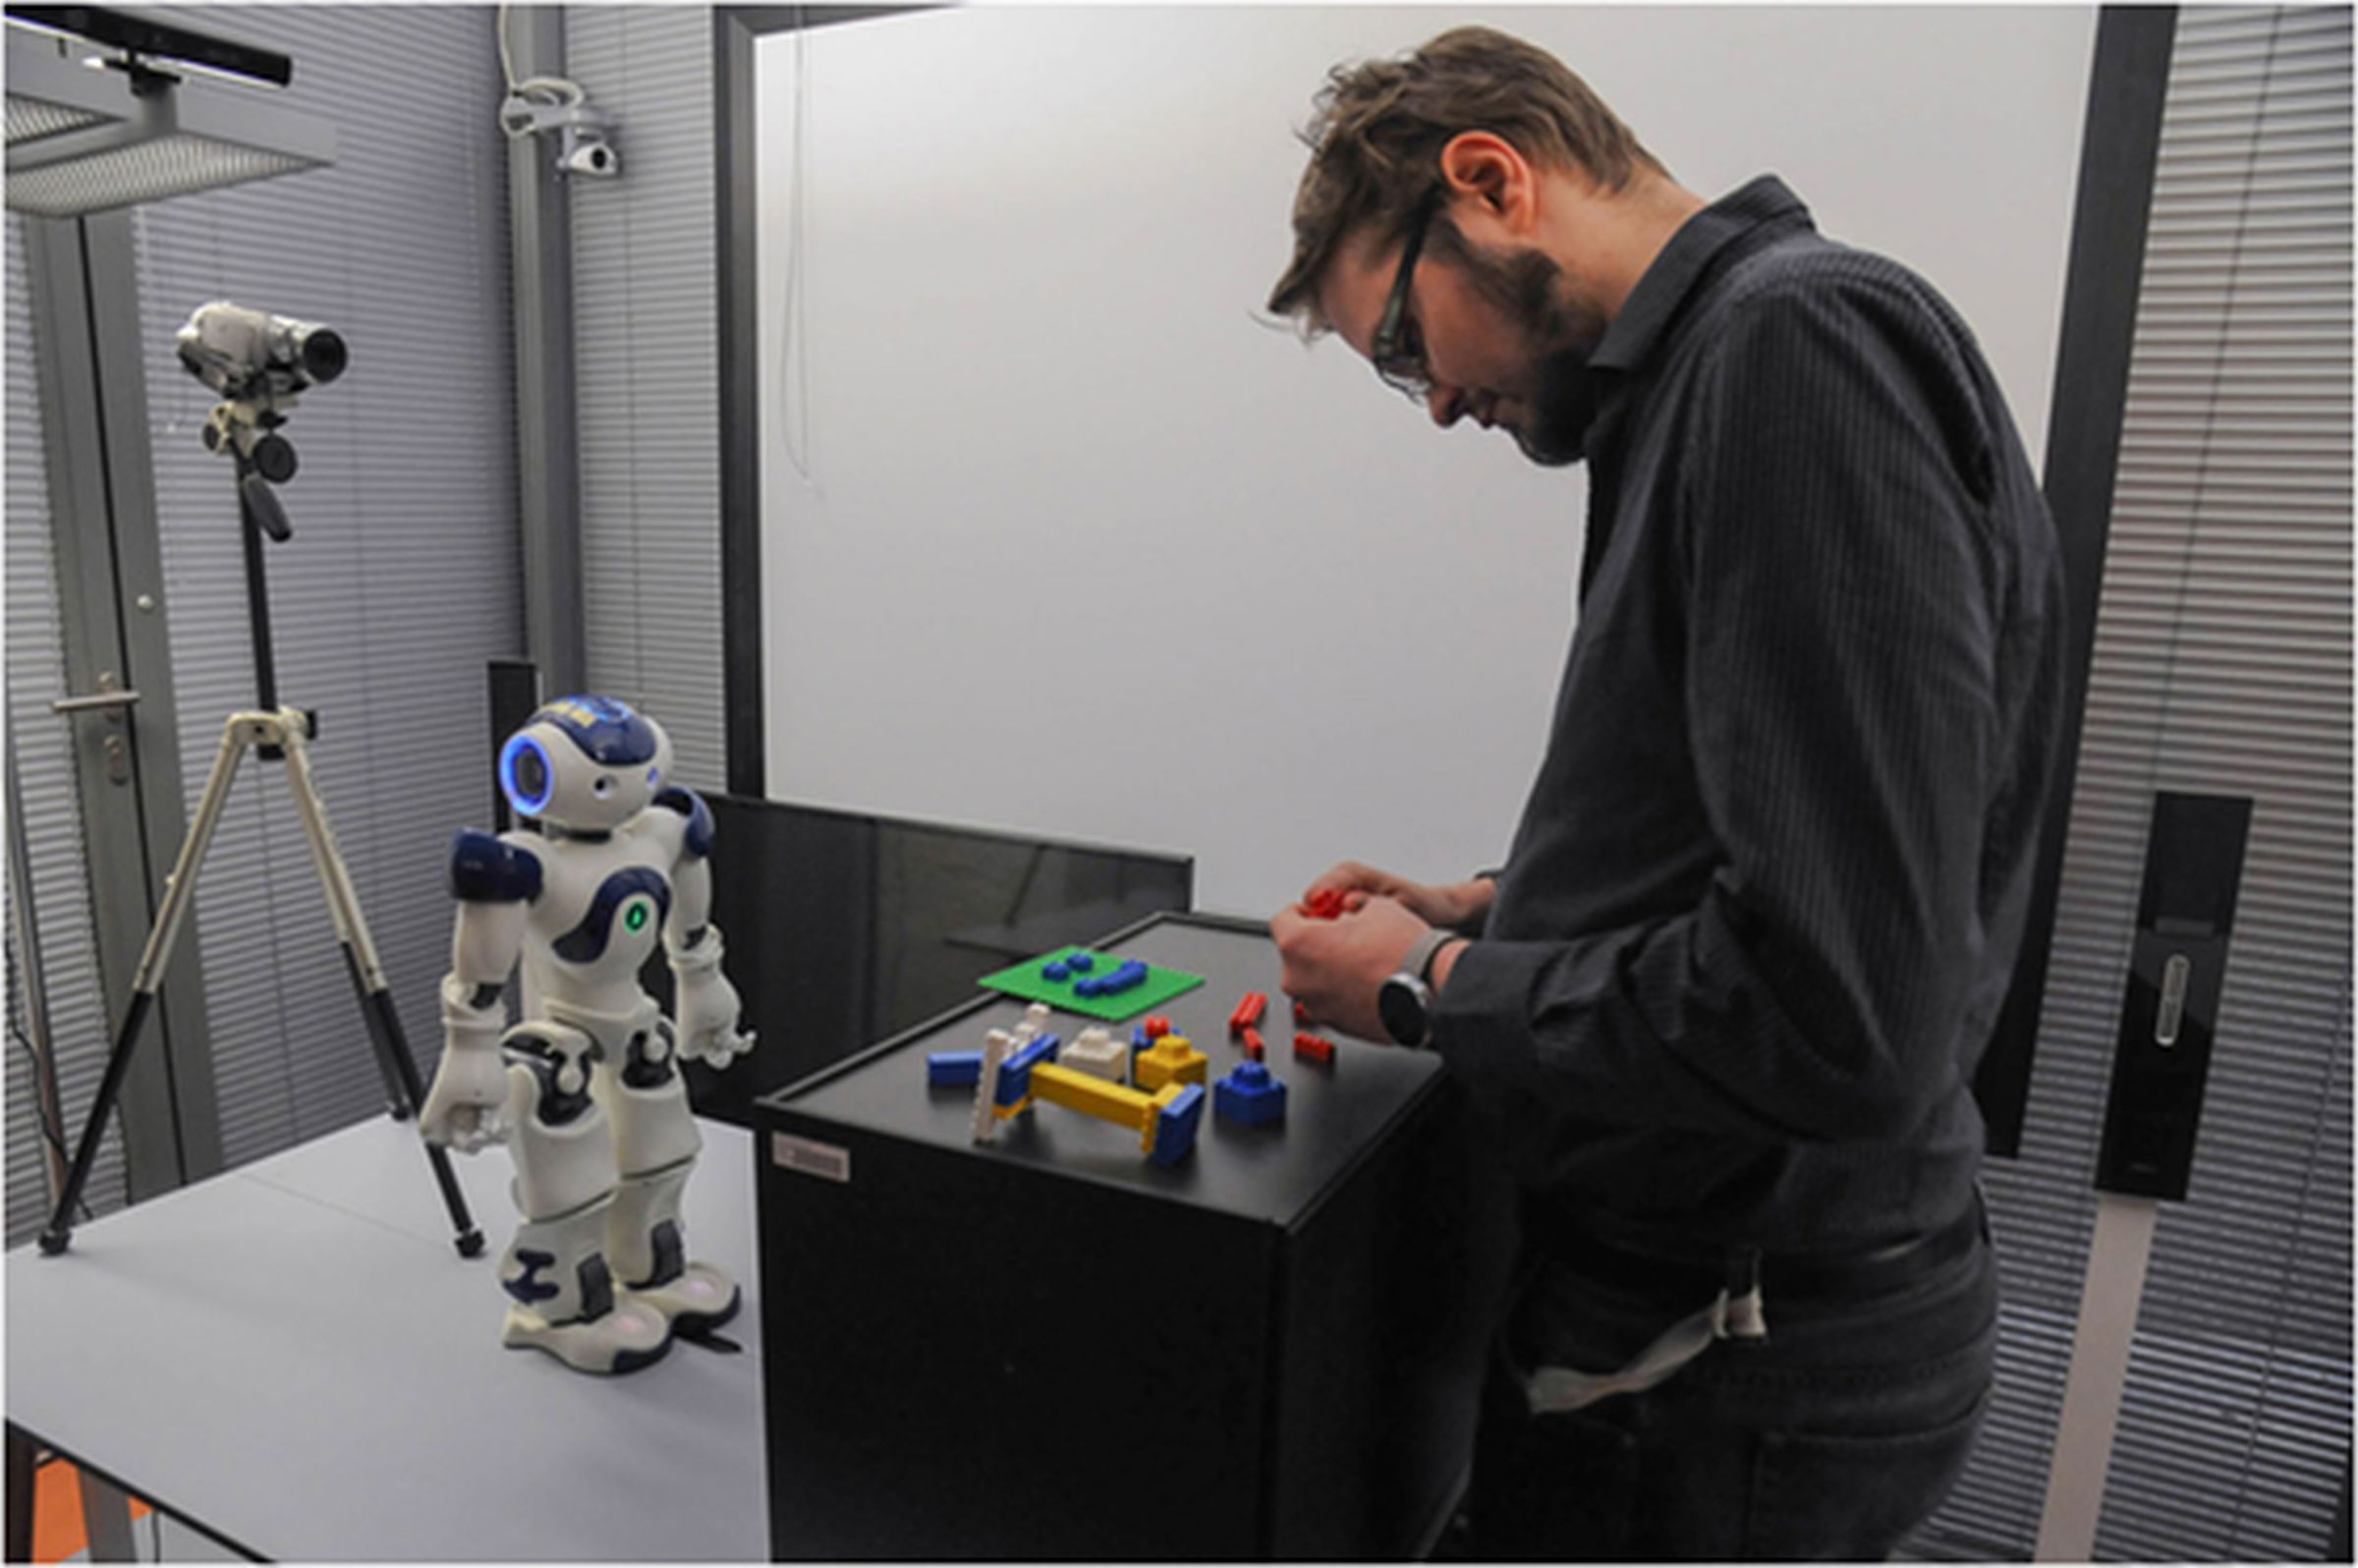 The experiment in Salzburg asked human volunteers to build LEGO creations with help from a robot. Participants were filmed to study their reactions. 